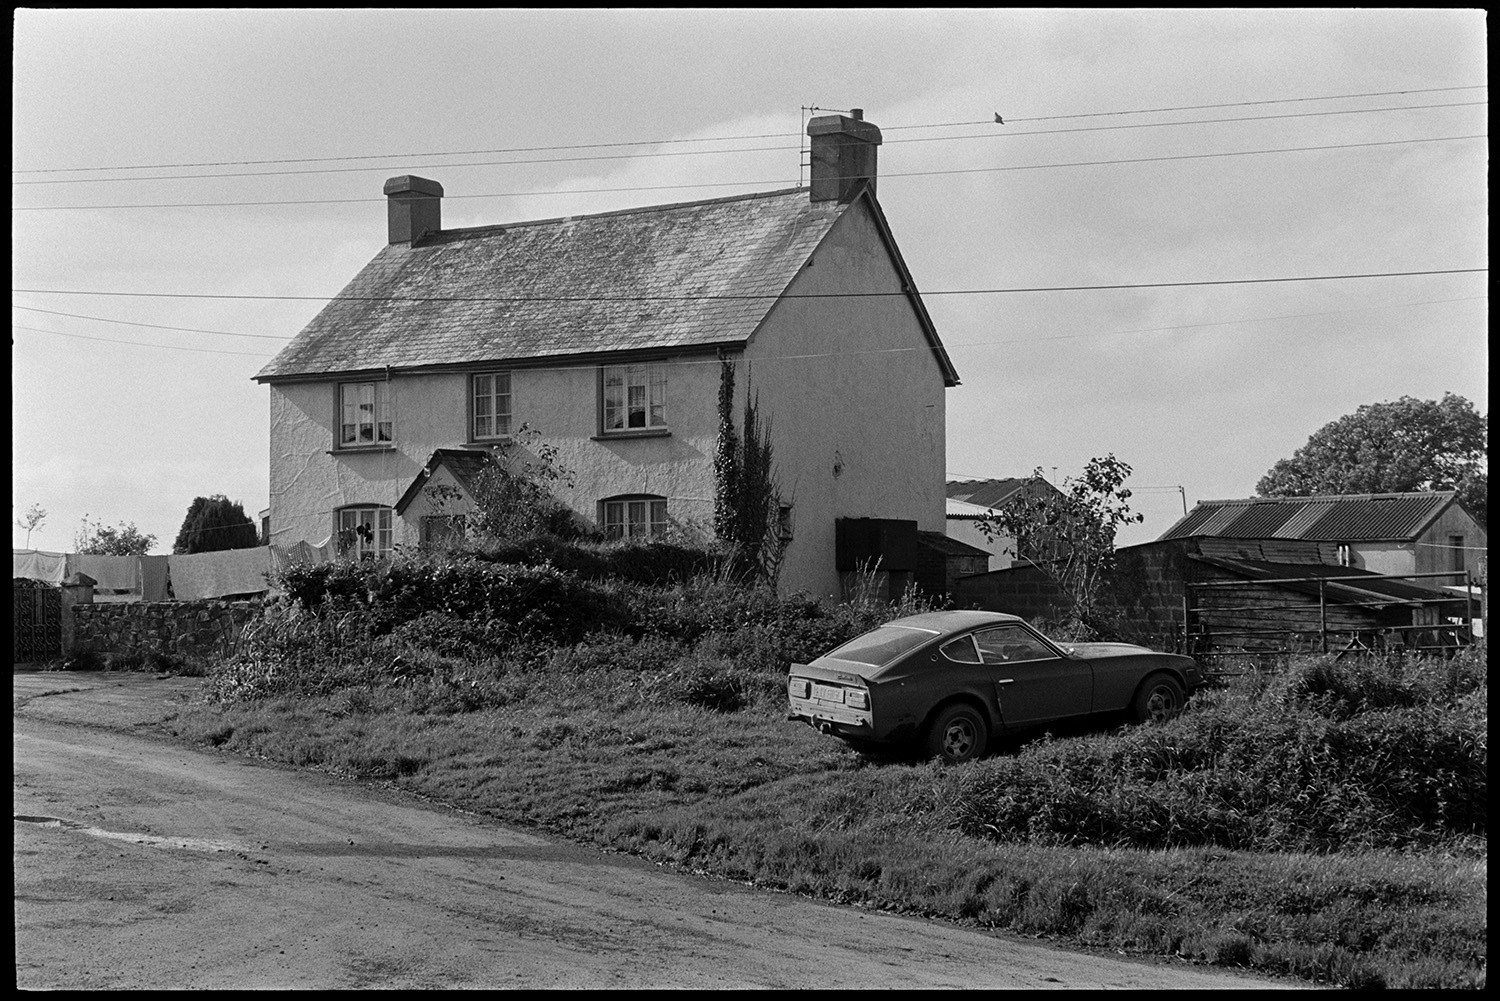 Small wooden shed, garage and house covered in posters. 
[A car parked outside a farmhouse possibly near Northlew, Beaworthy. Washing is hung out to dry on a washing line in front of the house and various sheds or barns can be seen in the background.]